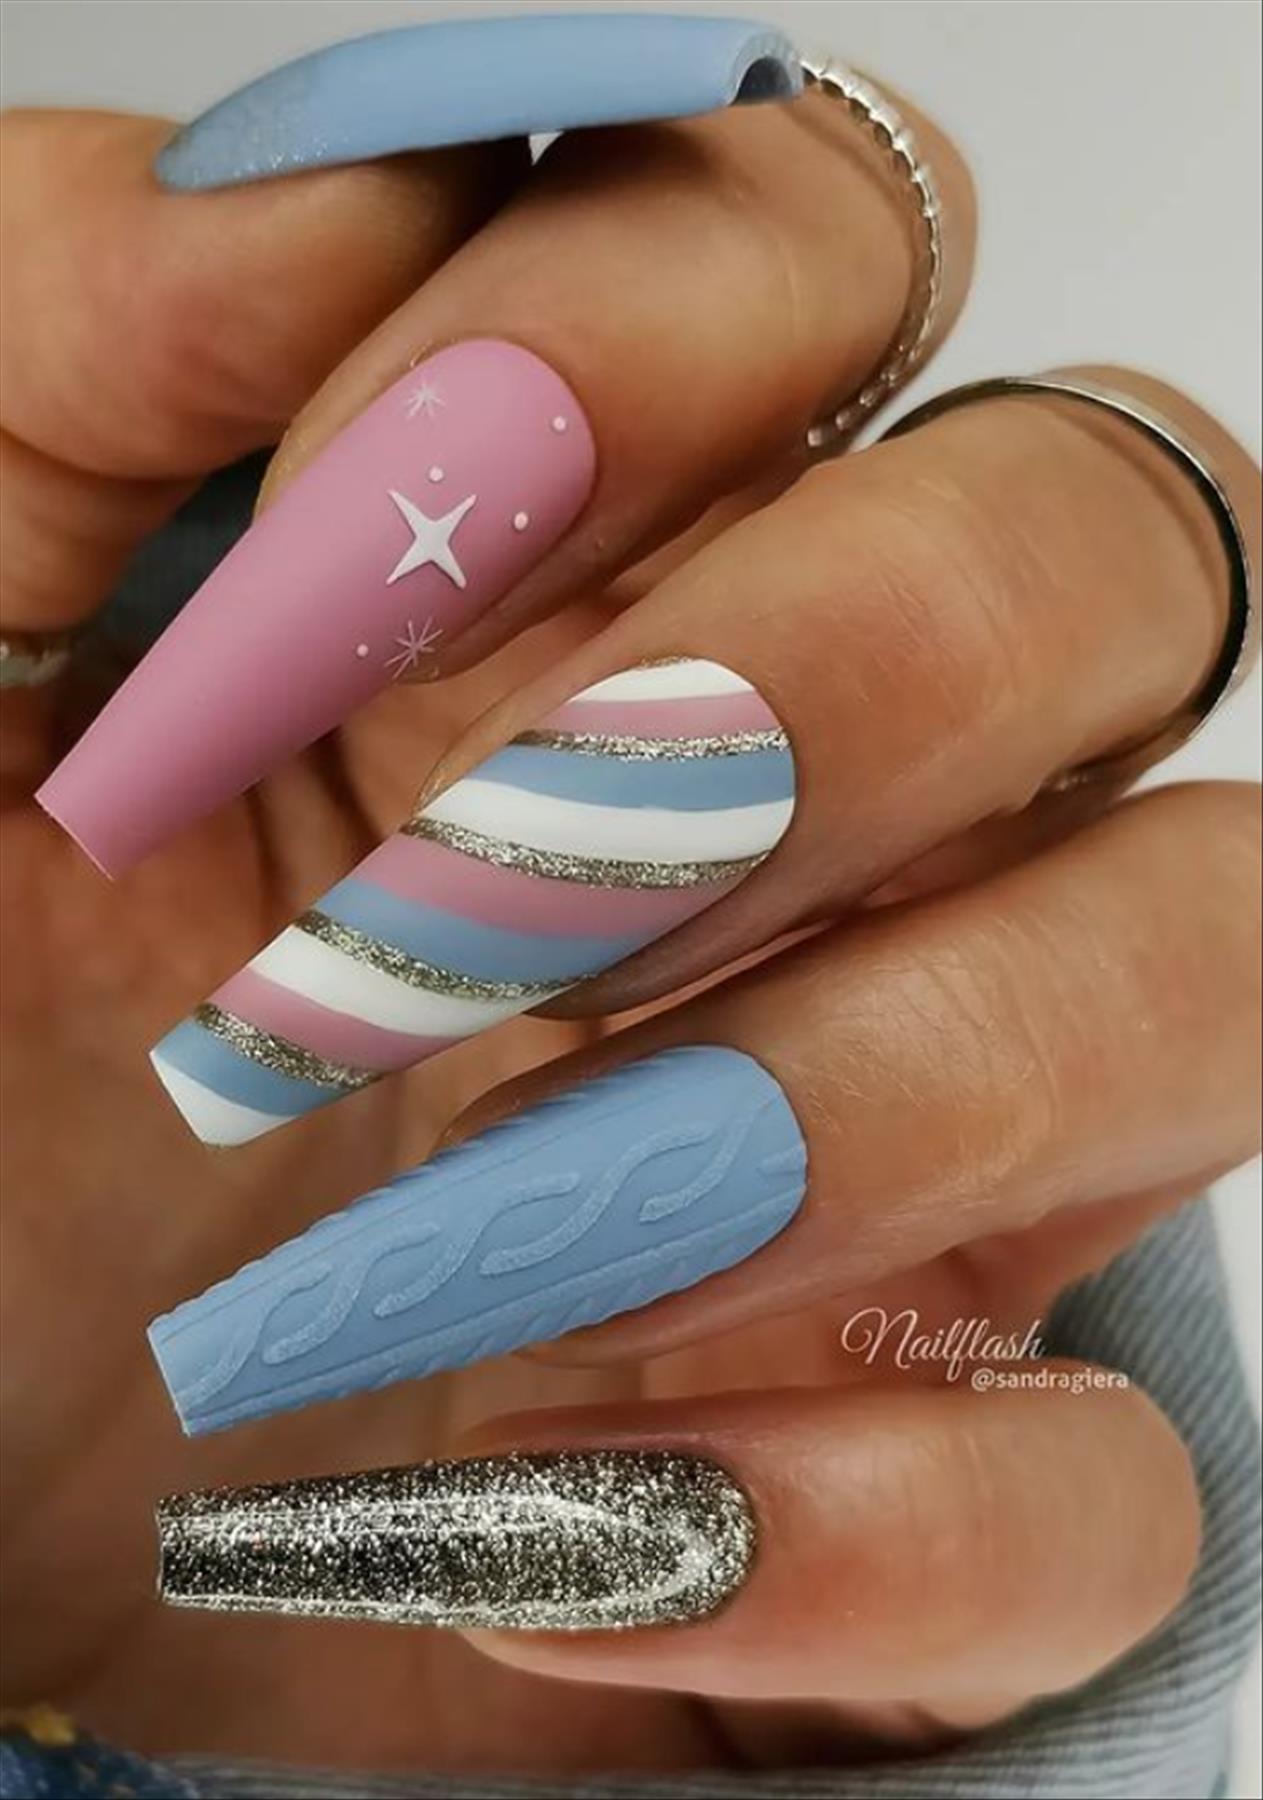 Adorable blue coffin nails for Winter nail colors 2021